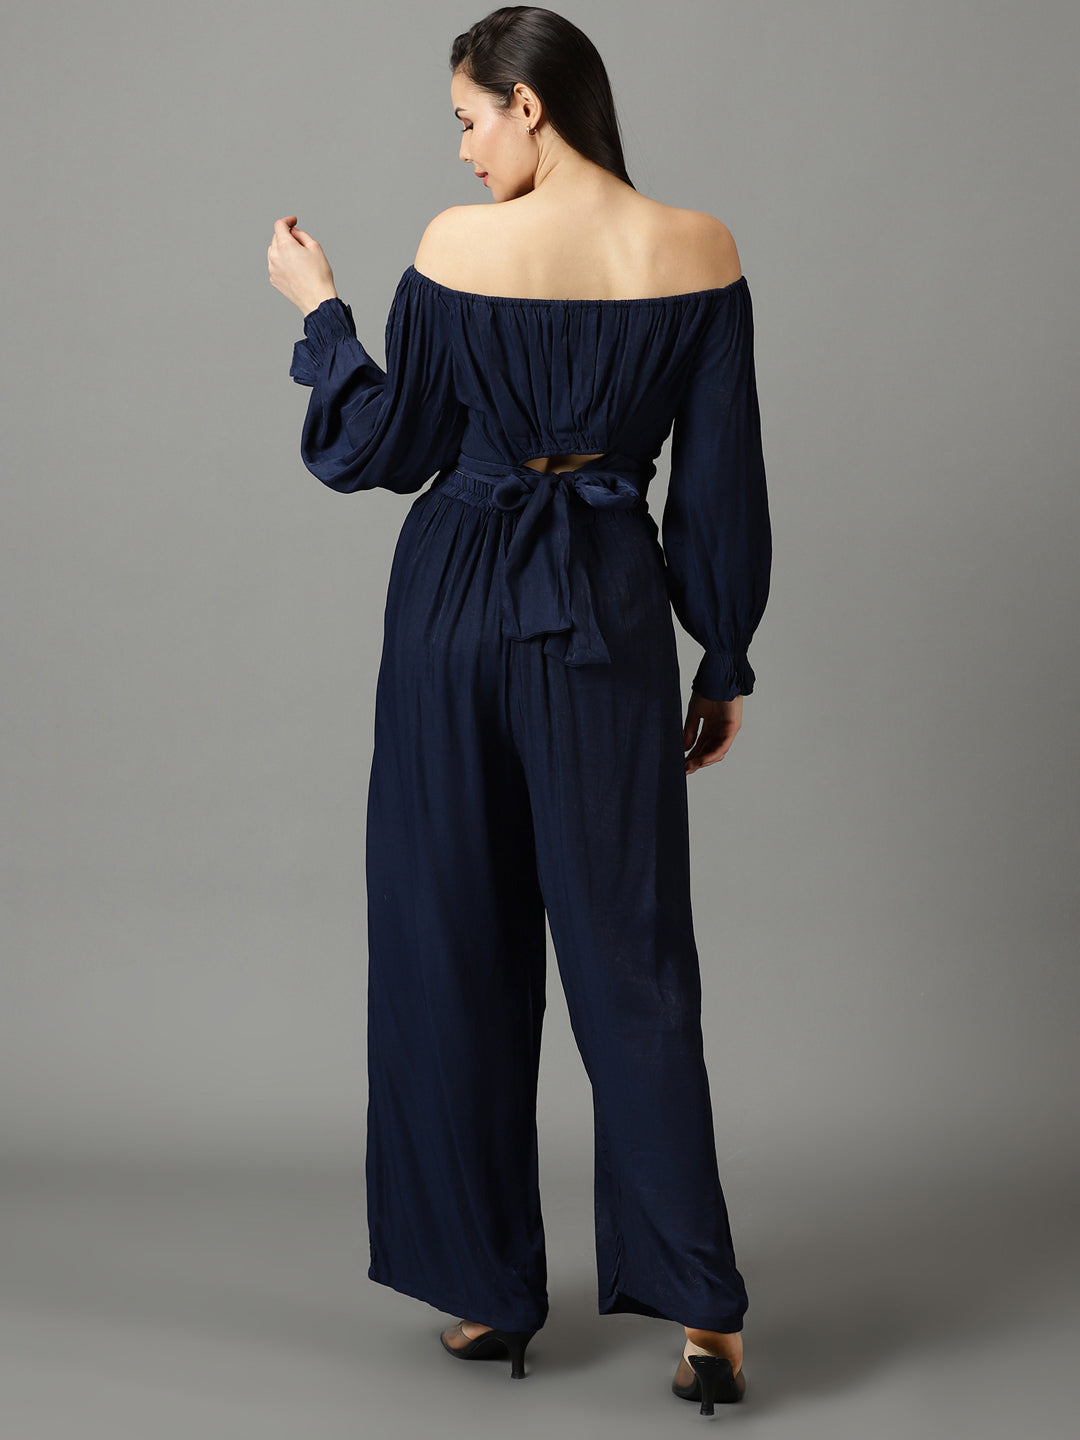 Women's Navy Blue Solid Co-Ords